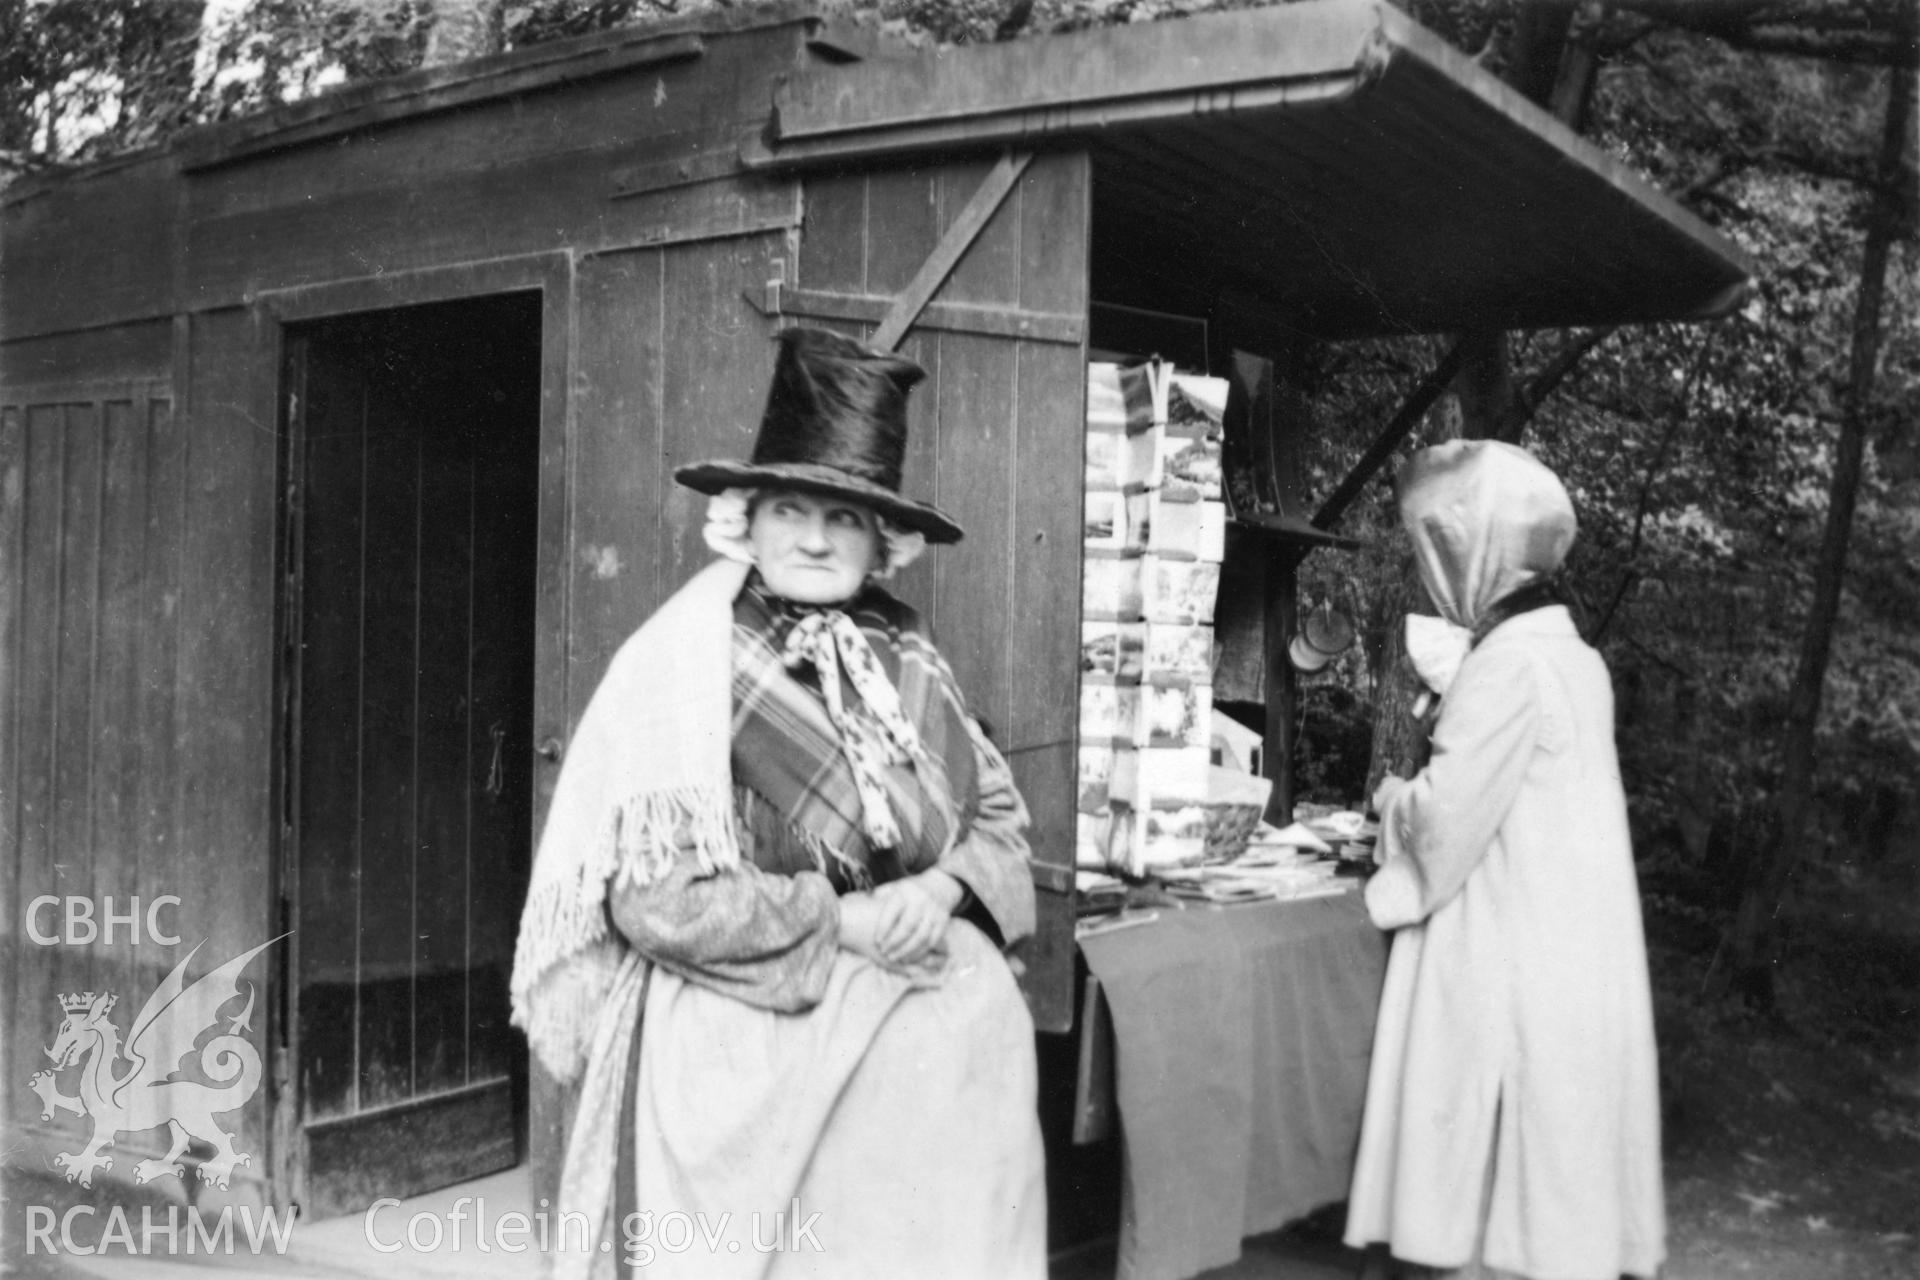 Black and white photograph showing Jane Jones' bookstall at Betws y Coed.